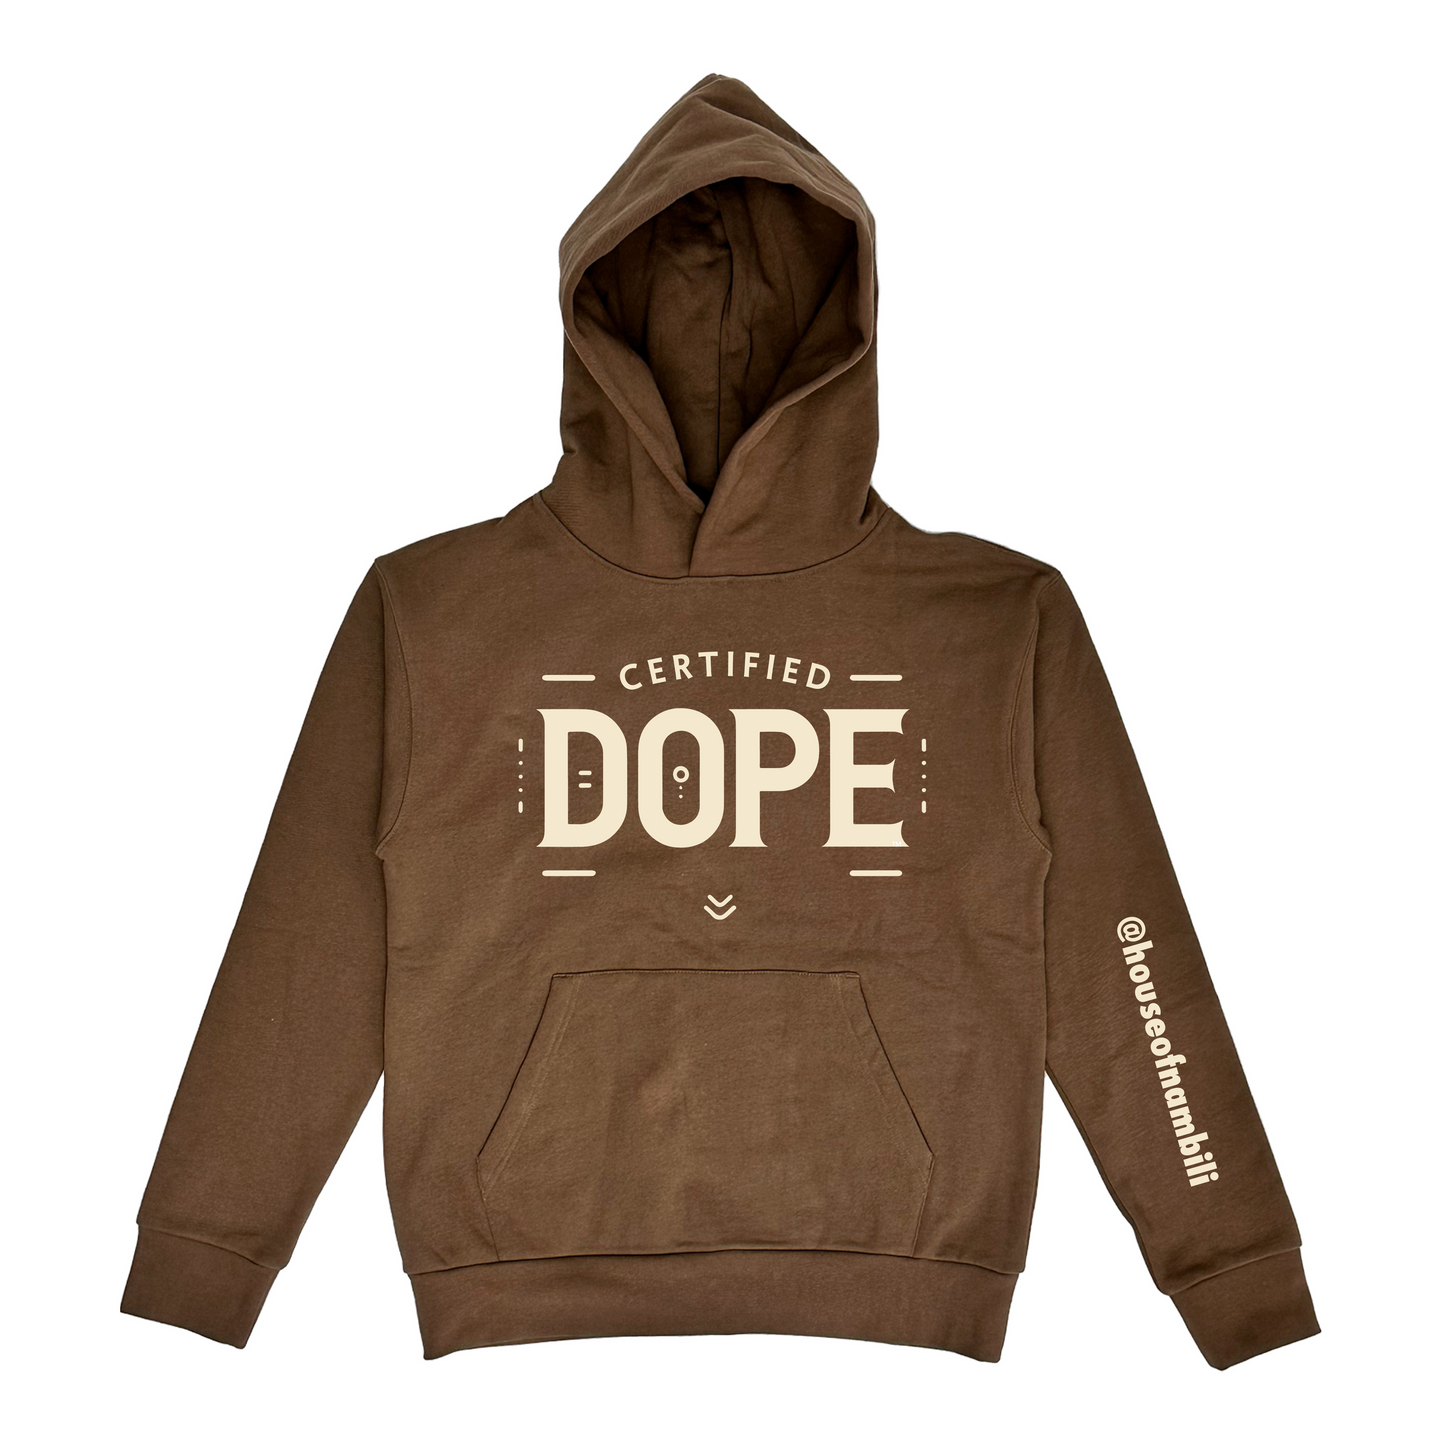 House of Nambili 'Certified Dope' Hoodie